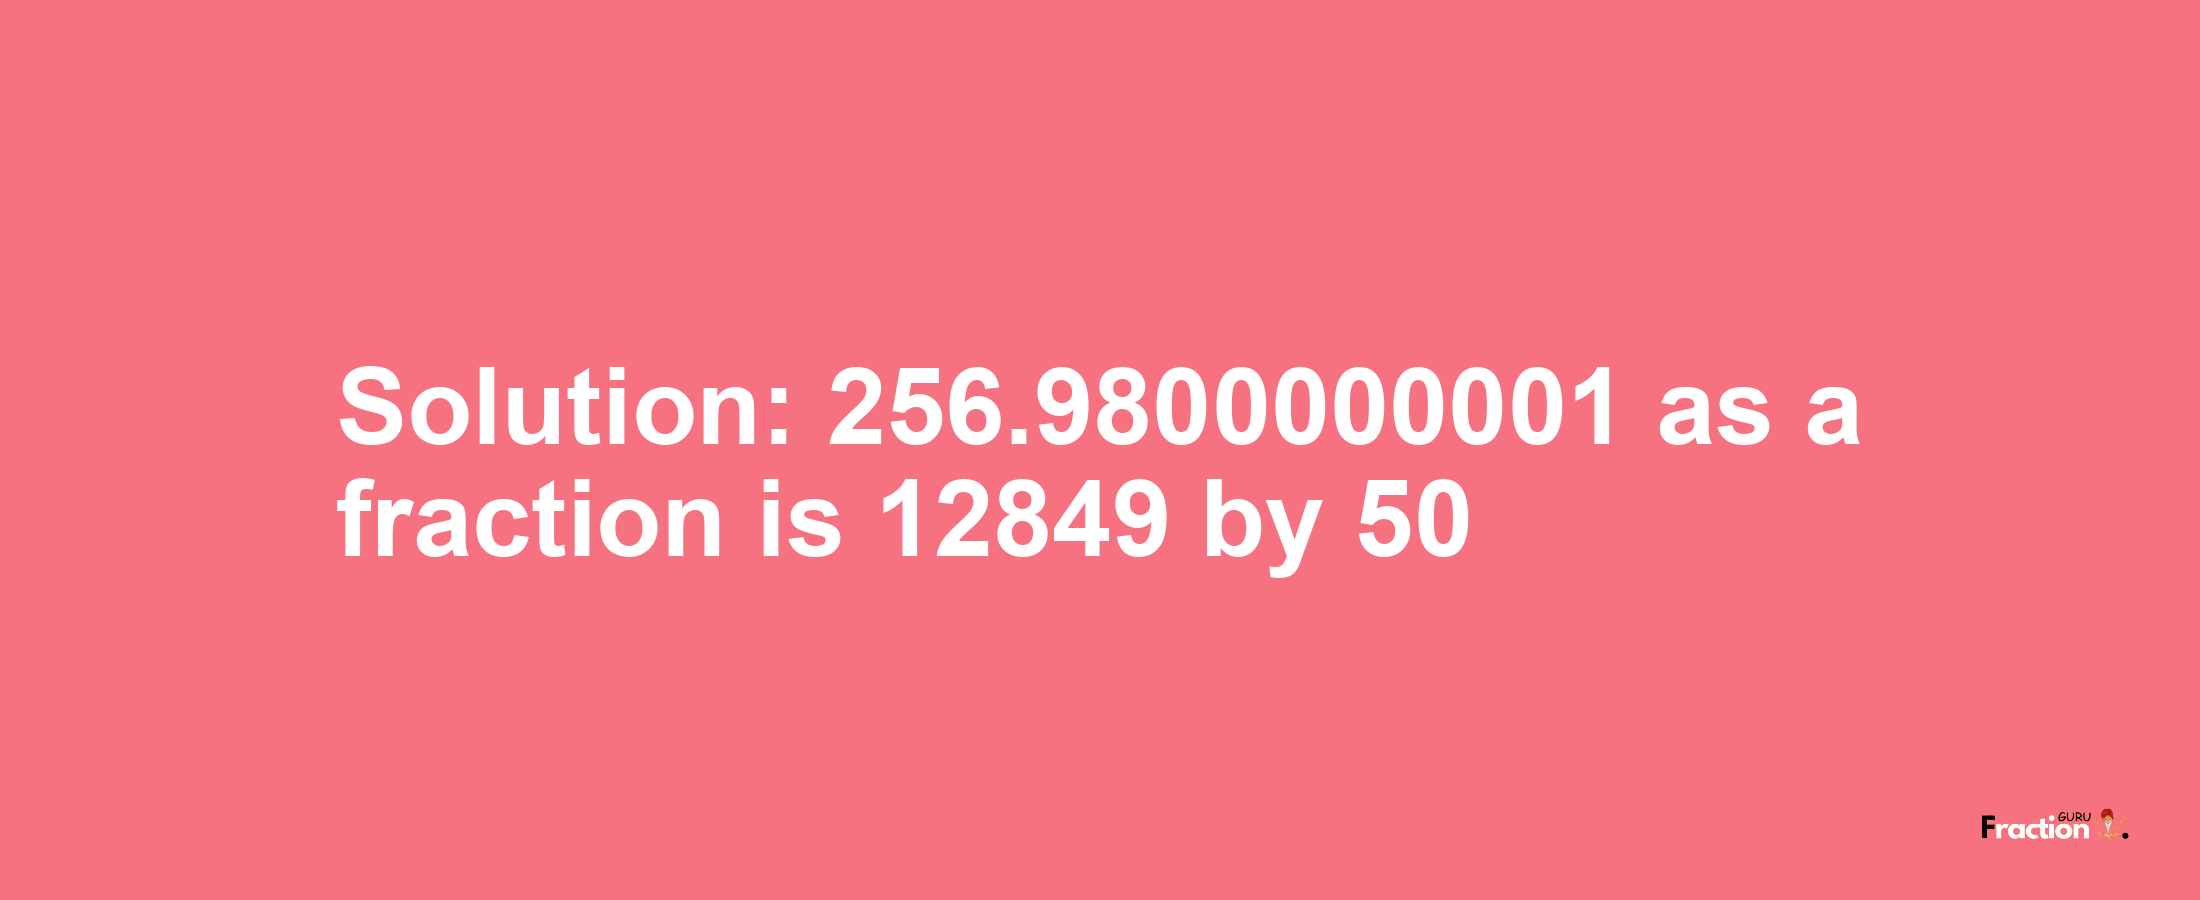 Solution:256.9800000001 as a fraction is 12849/50